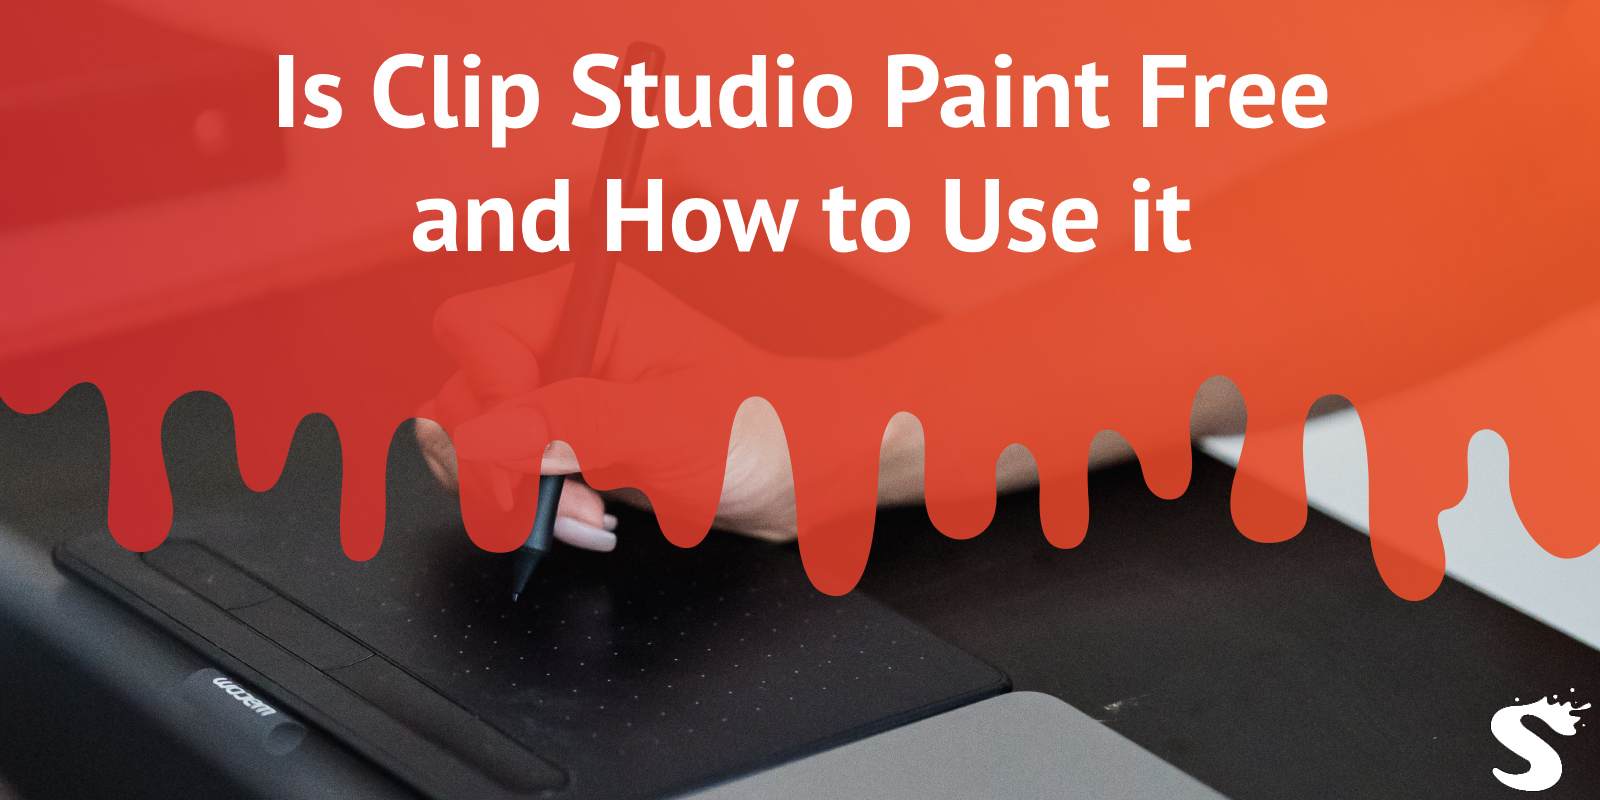 Is Clip Studio Paint Free and How to Use it